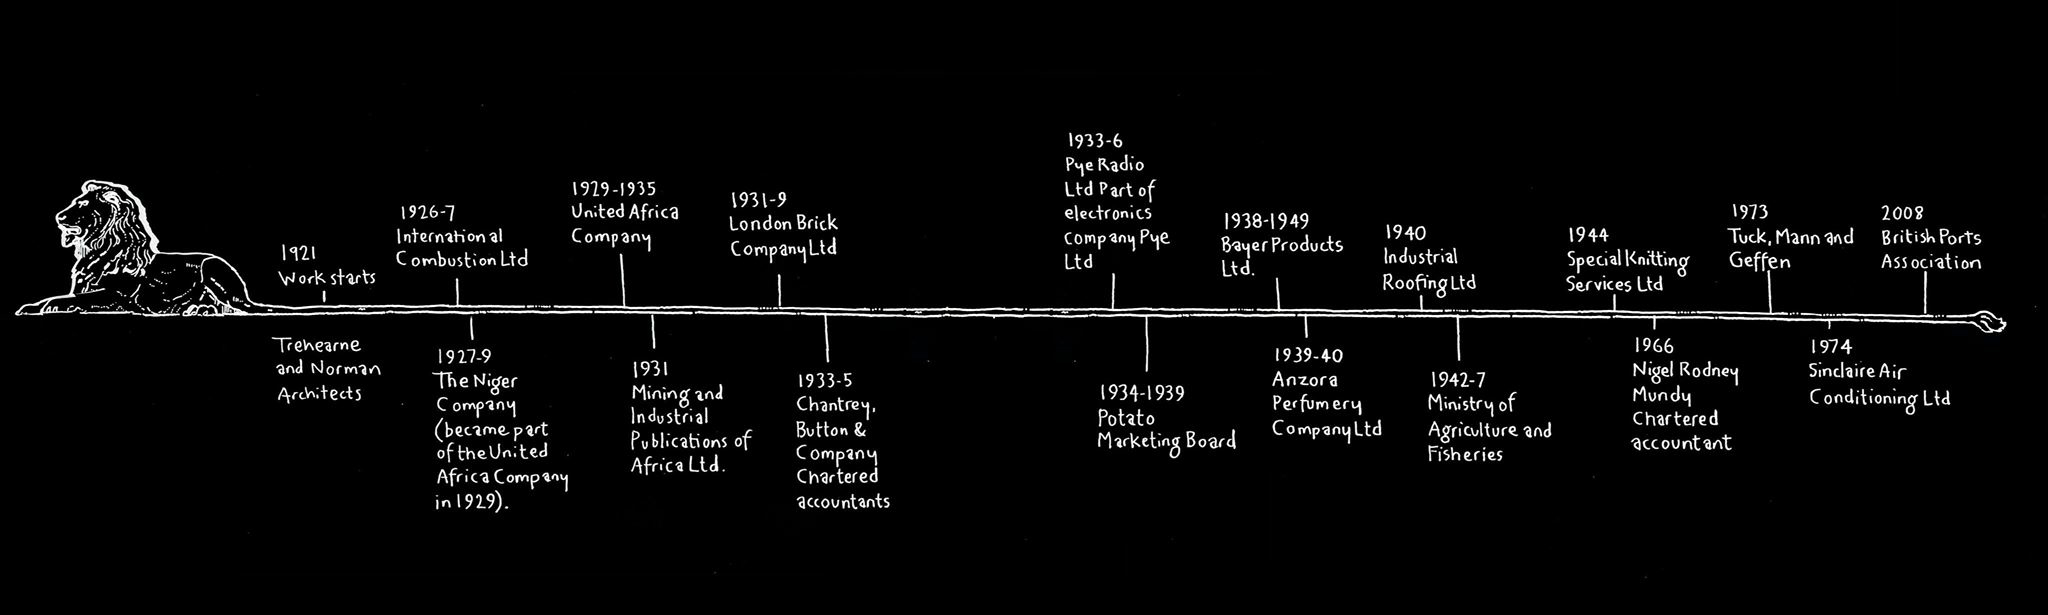 A timeline of points from the history of Africa House from 1921 to 2008